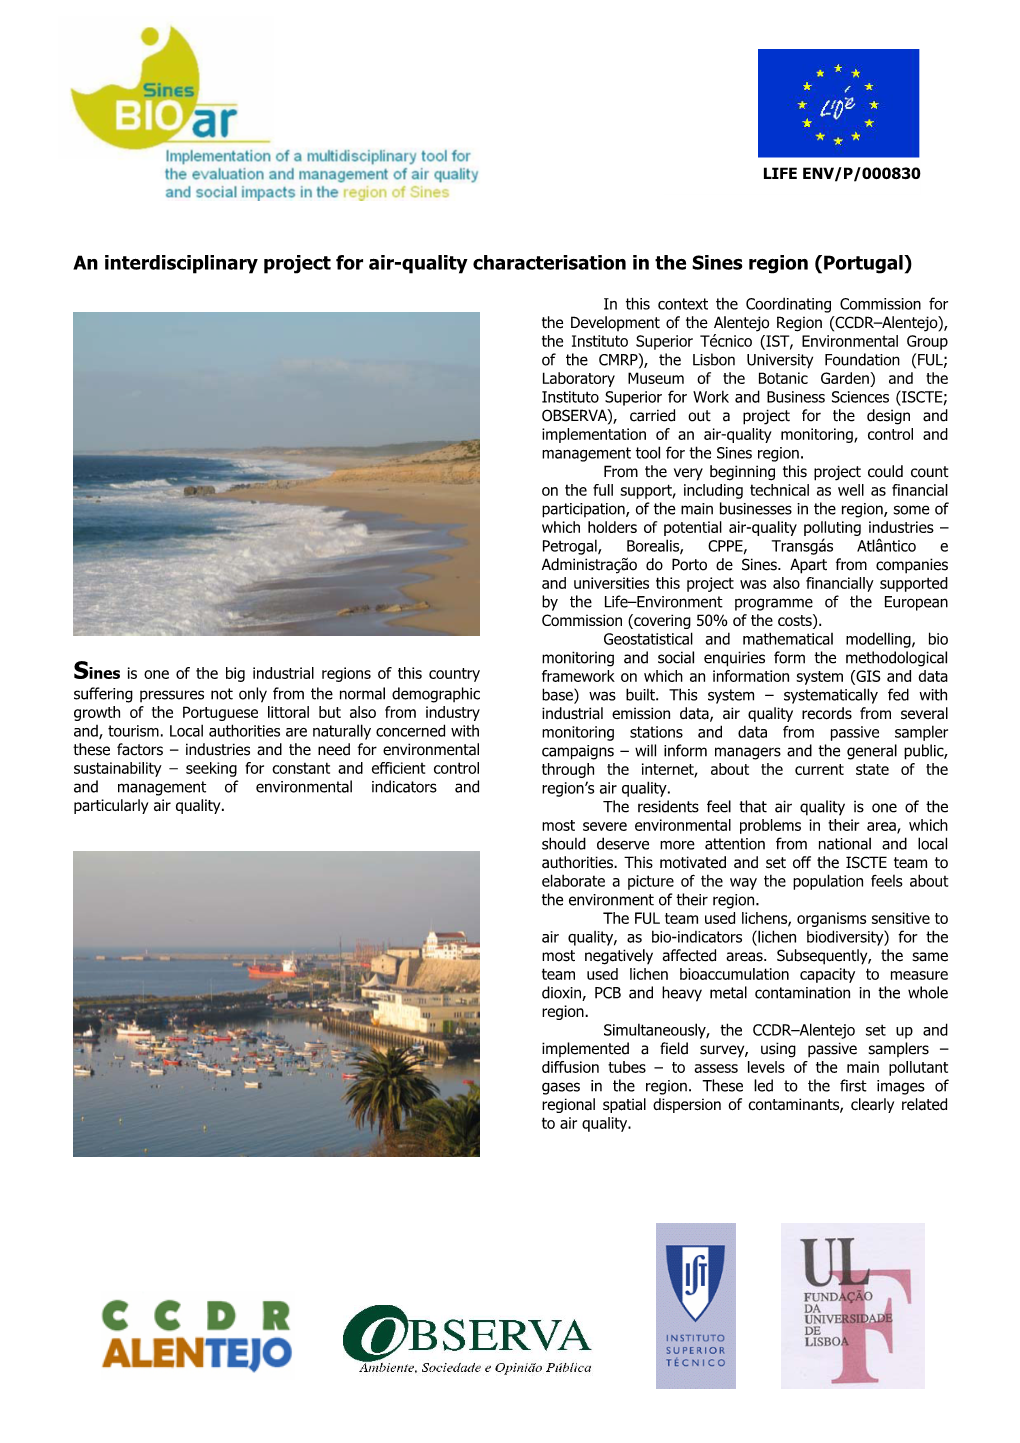 An Interdisciplinary Project for Air-Quality Characterisation in the Sines Region (Portugal)